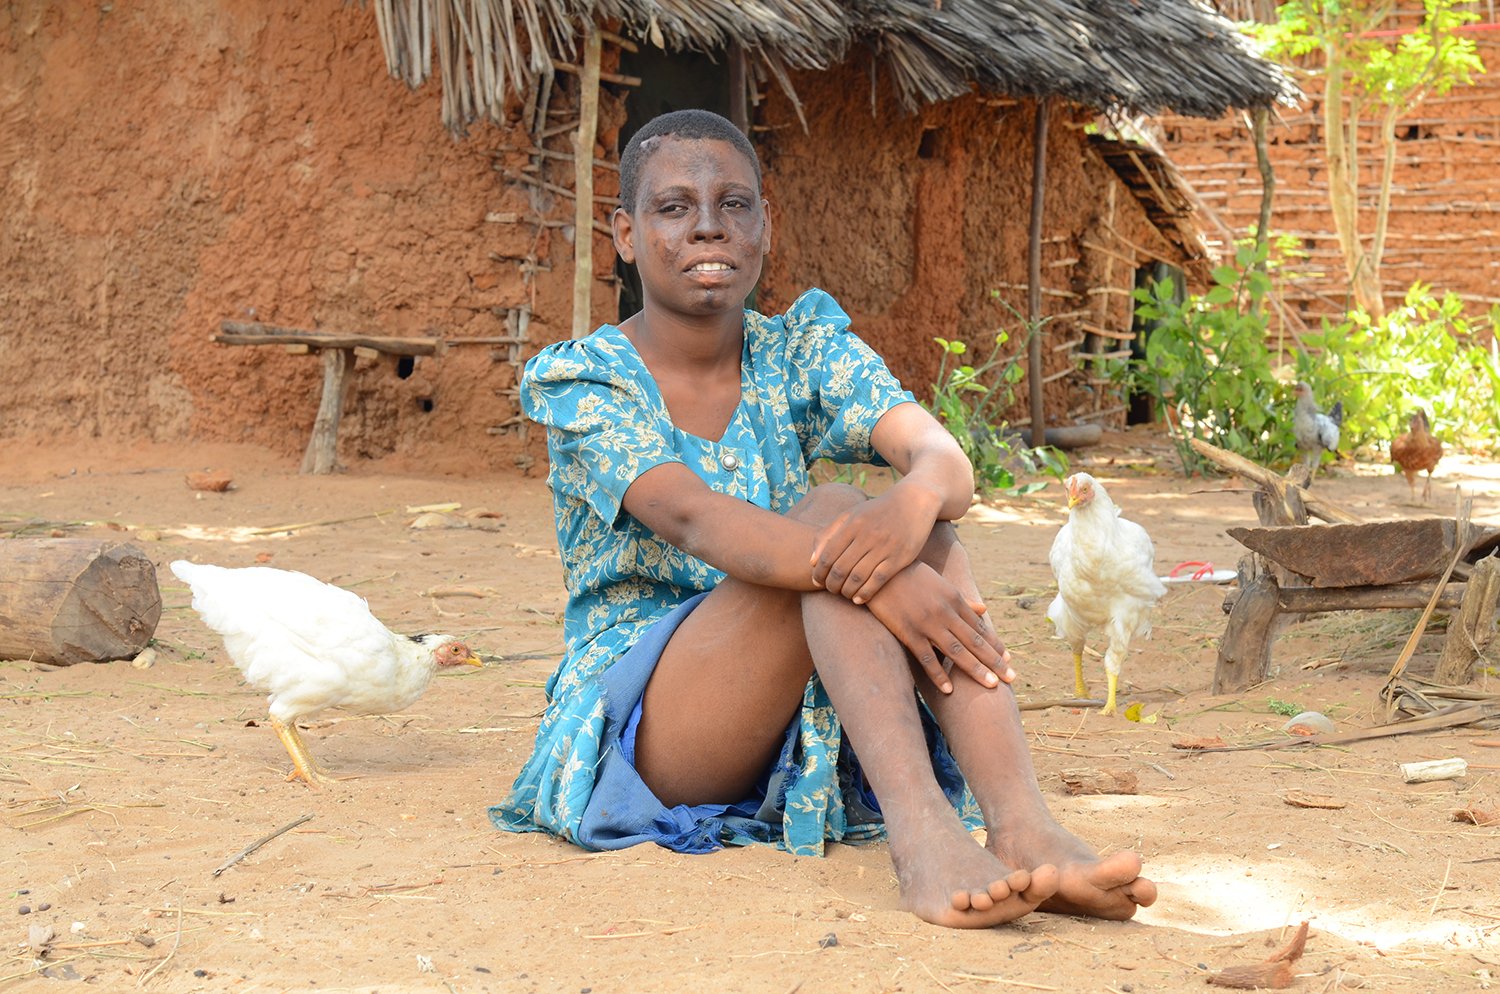 An adolescent girl is seated on the ground surrounded by chickens. Her complexion is affected by burn scars.